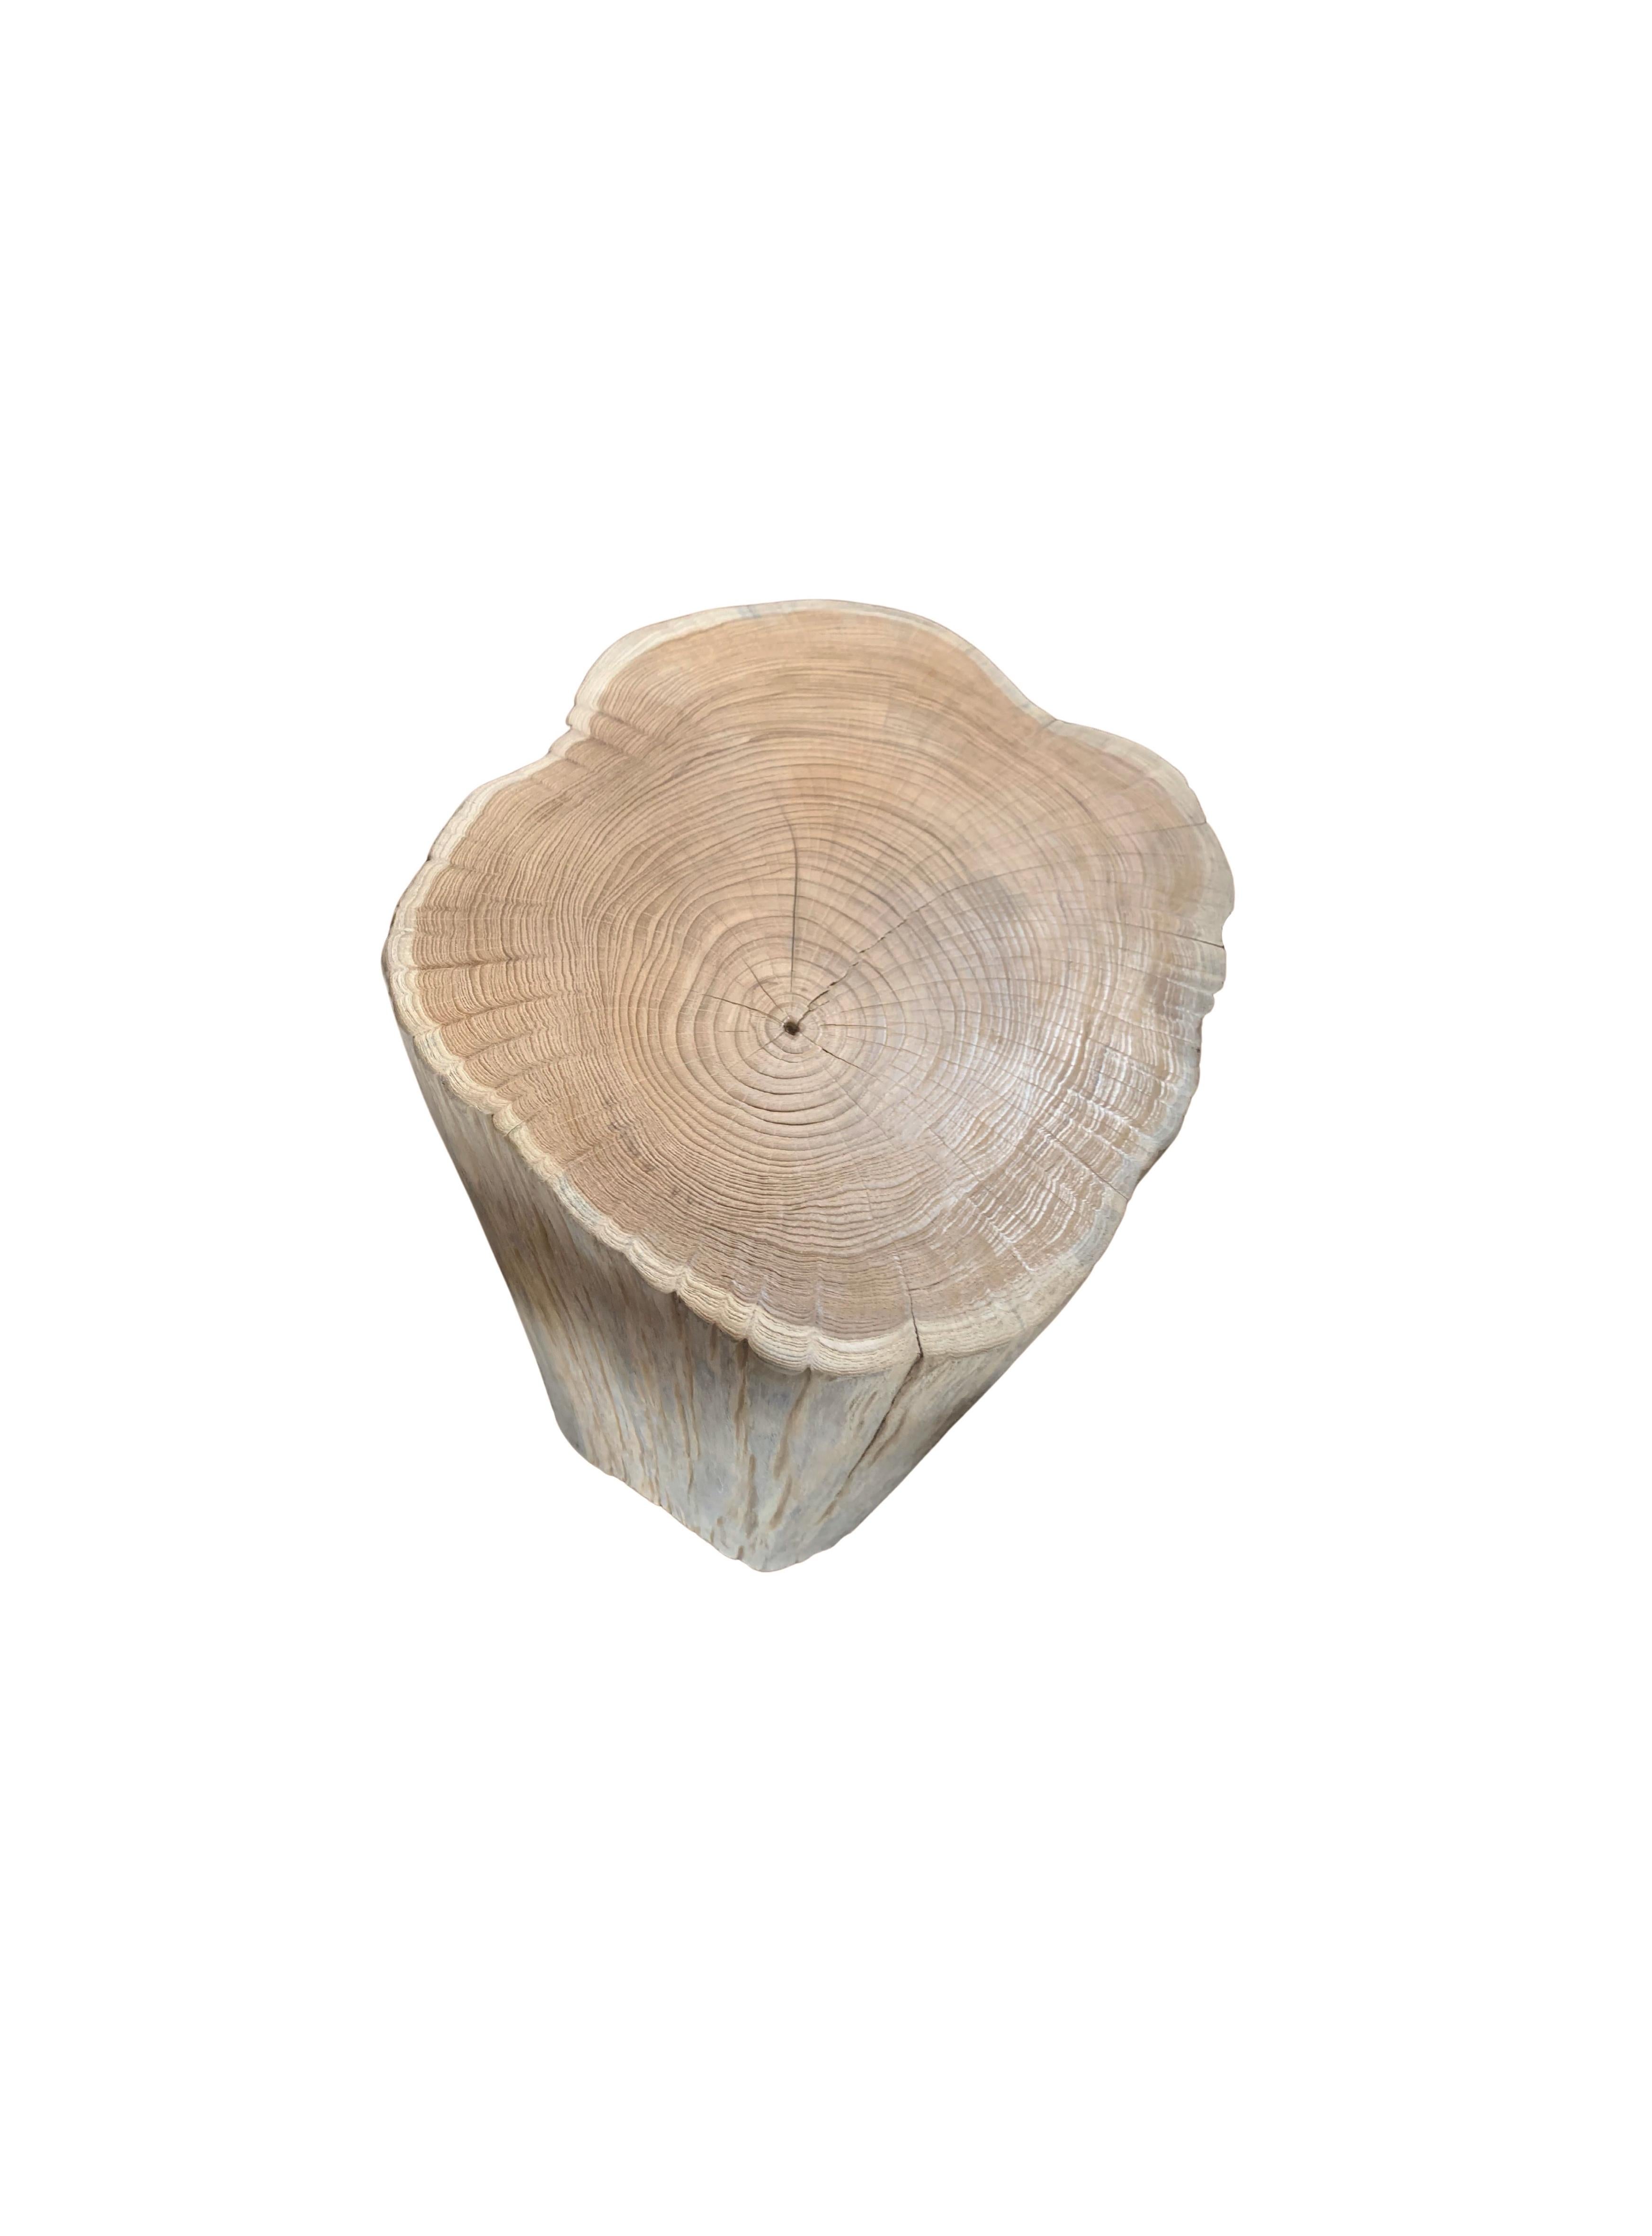 Organic Modern Tree Trunk Side Table Solid Mango Wood Bleached Finish Modern Organic For Sale